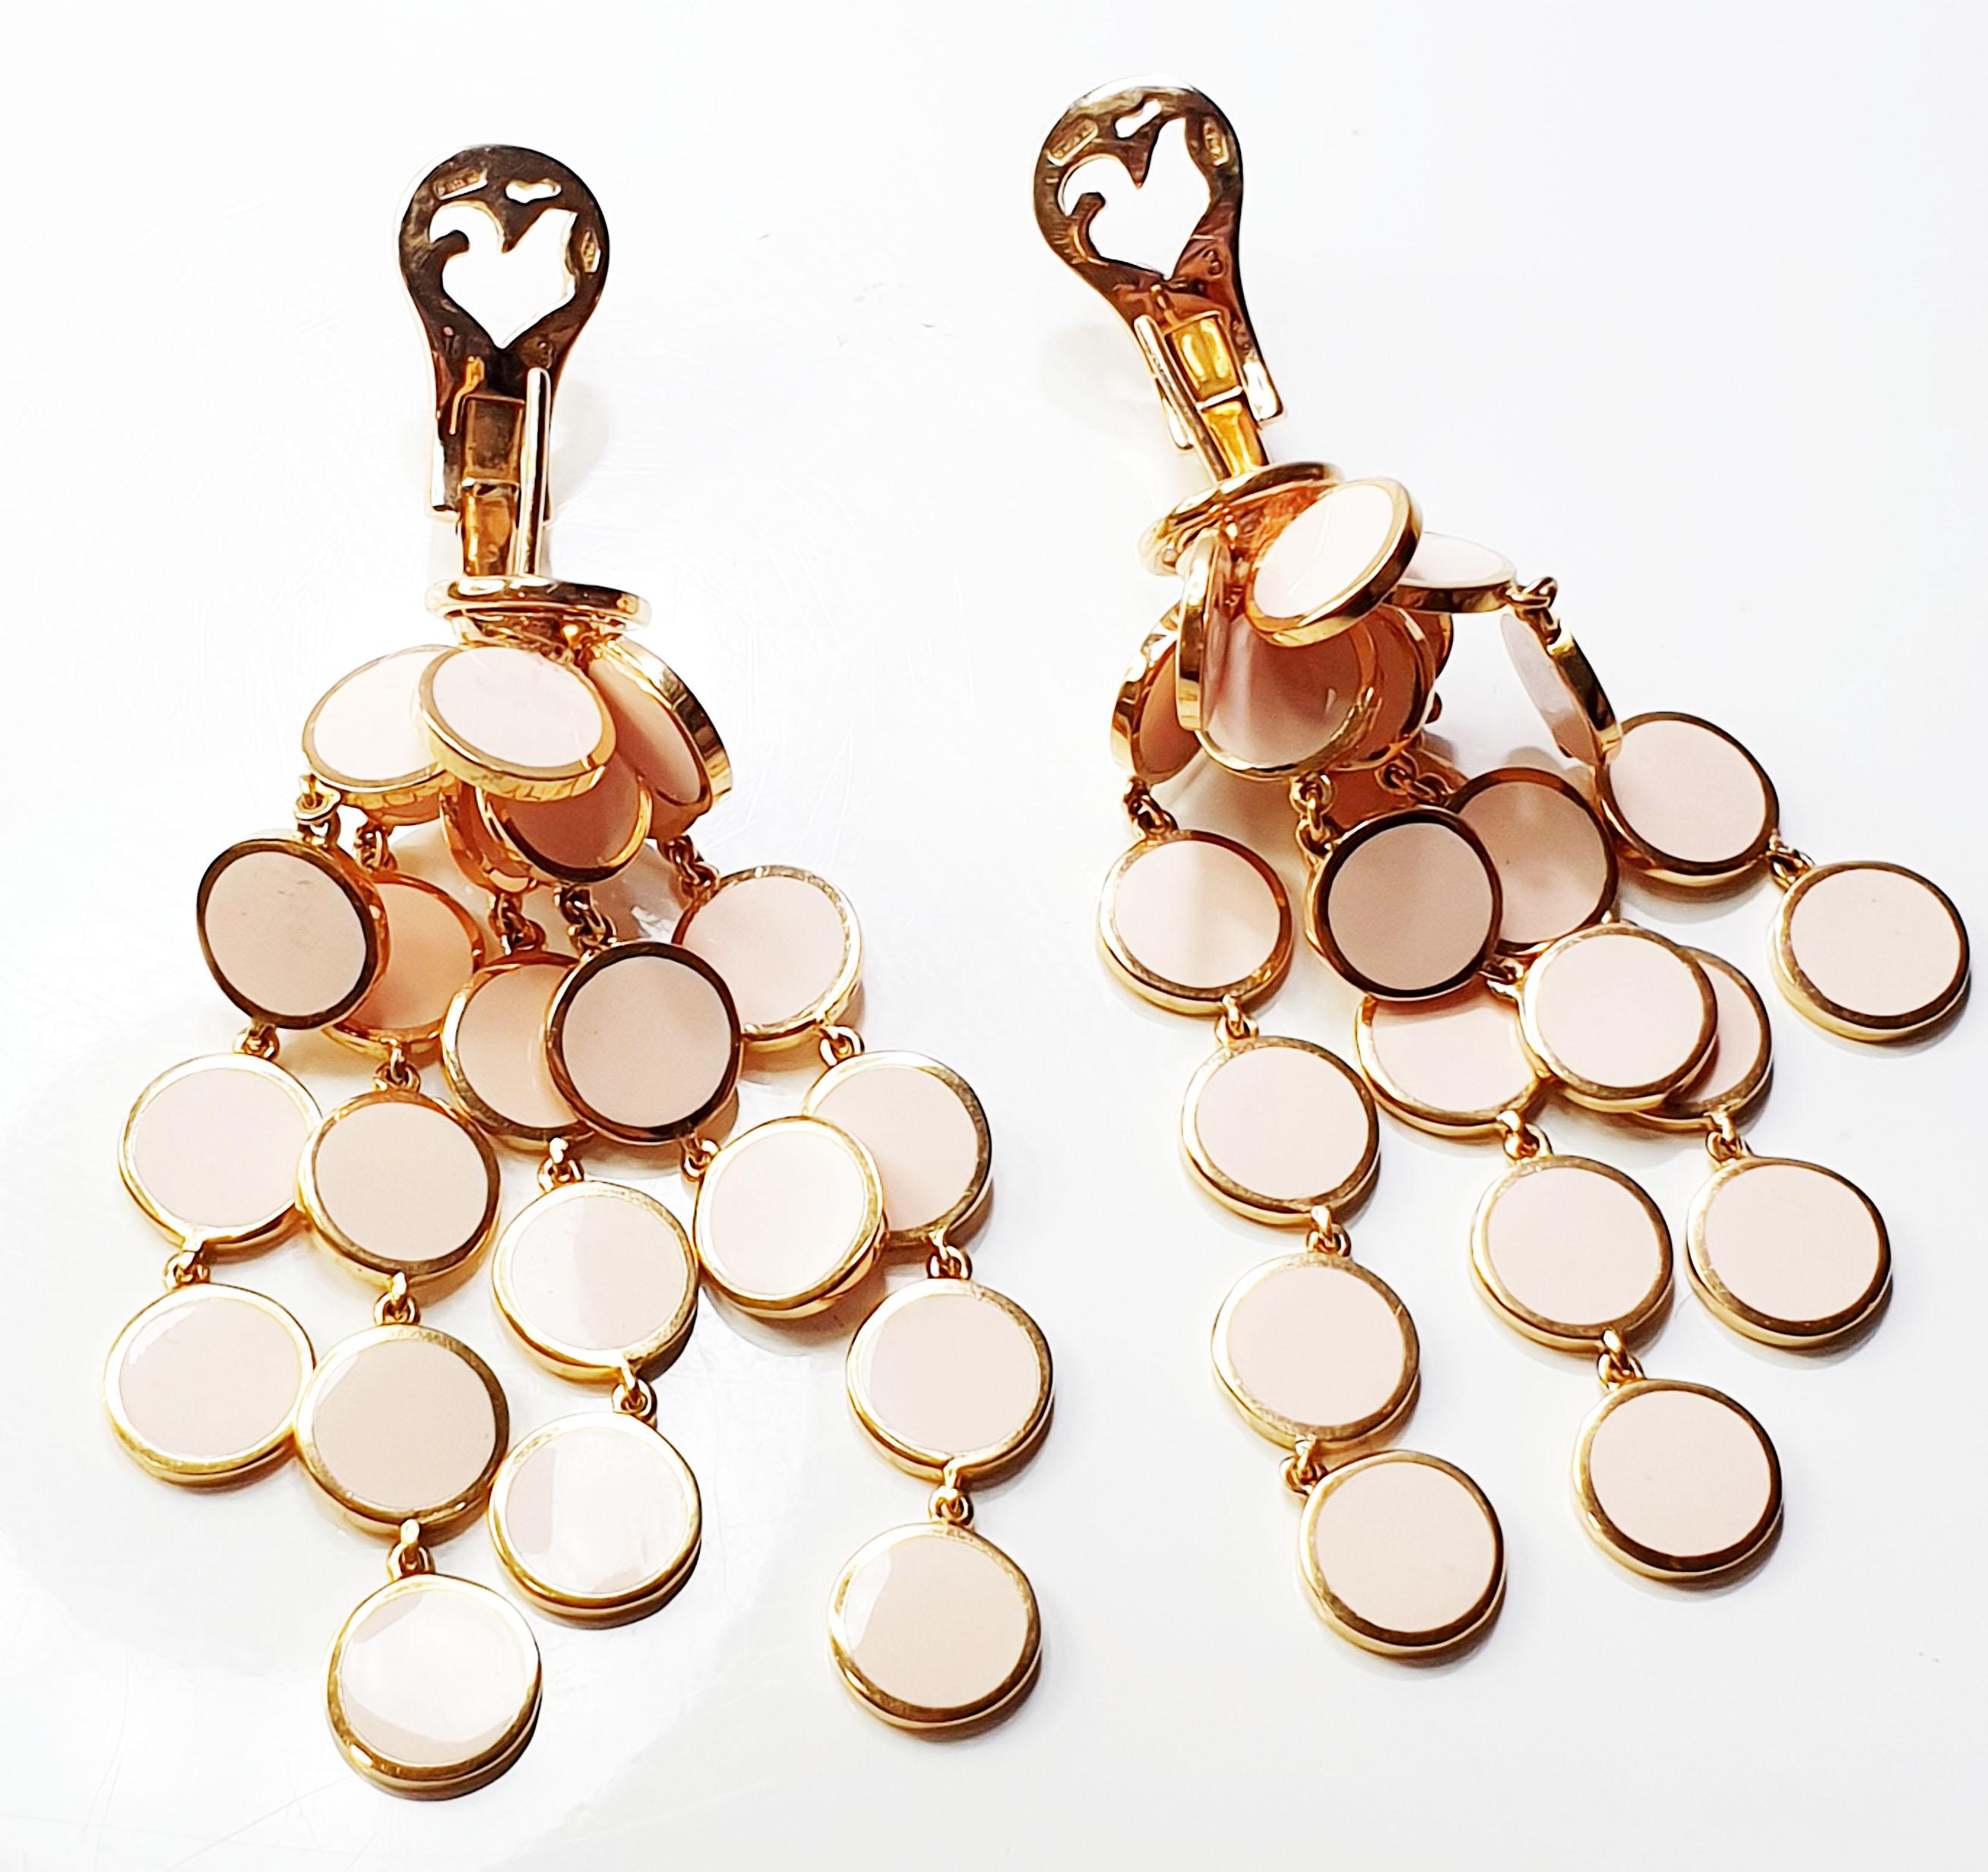 Chantecler Pink Pailletes Earrings, a glitttering cascade of precious petals, enriched by enamels encircled by rose gold Weight 10gr each and lenght 12mm 
Inspired by the caprese Dolce Vita of the Fifties, Paillettes is the epitome of a happy and